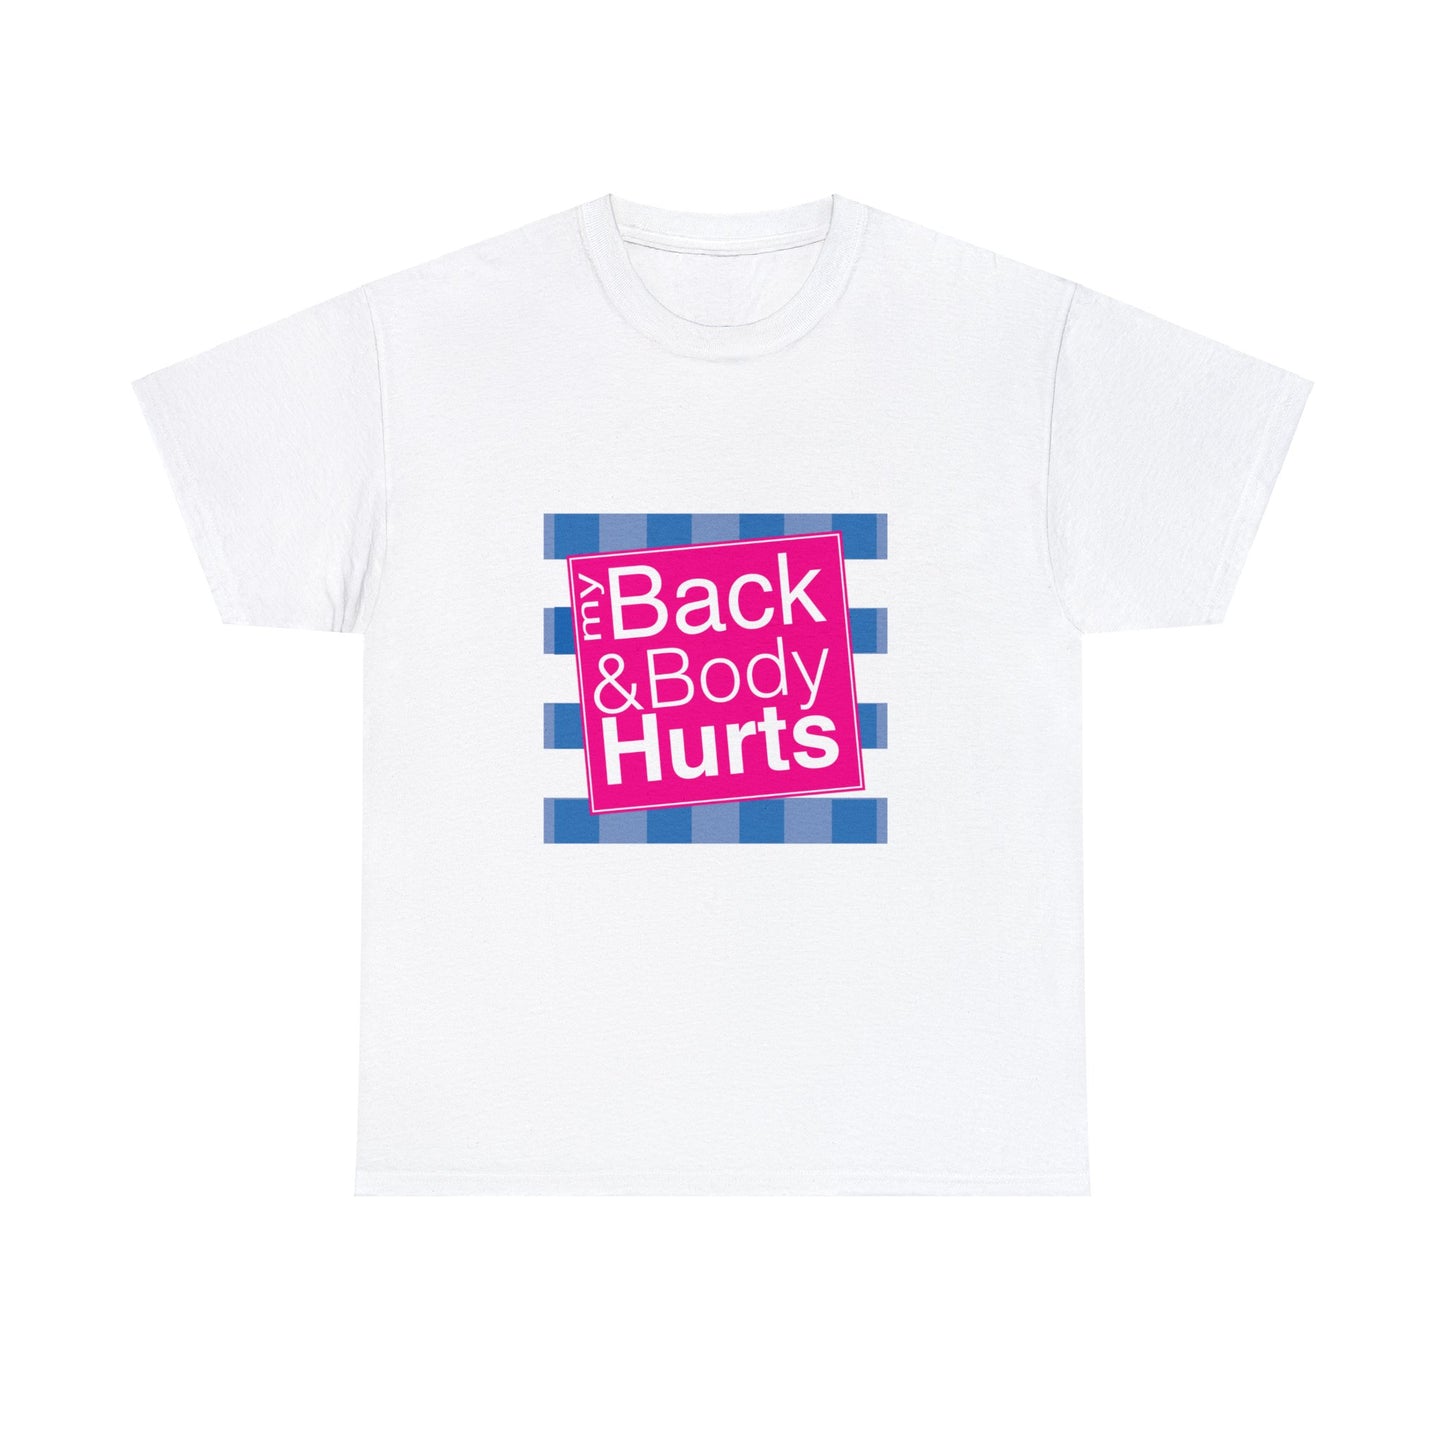 My Back and Body Hurts T-Shirt